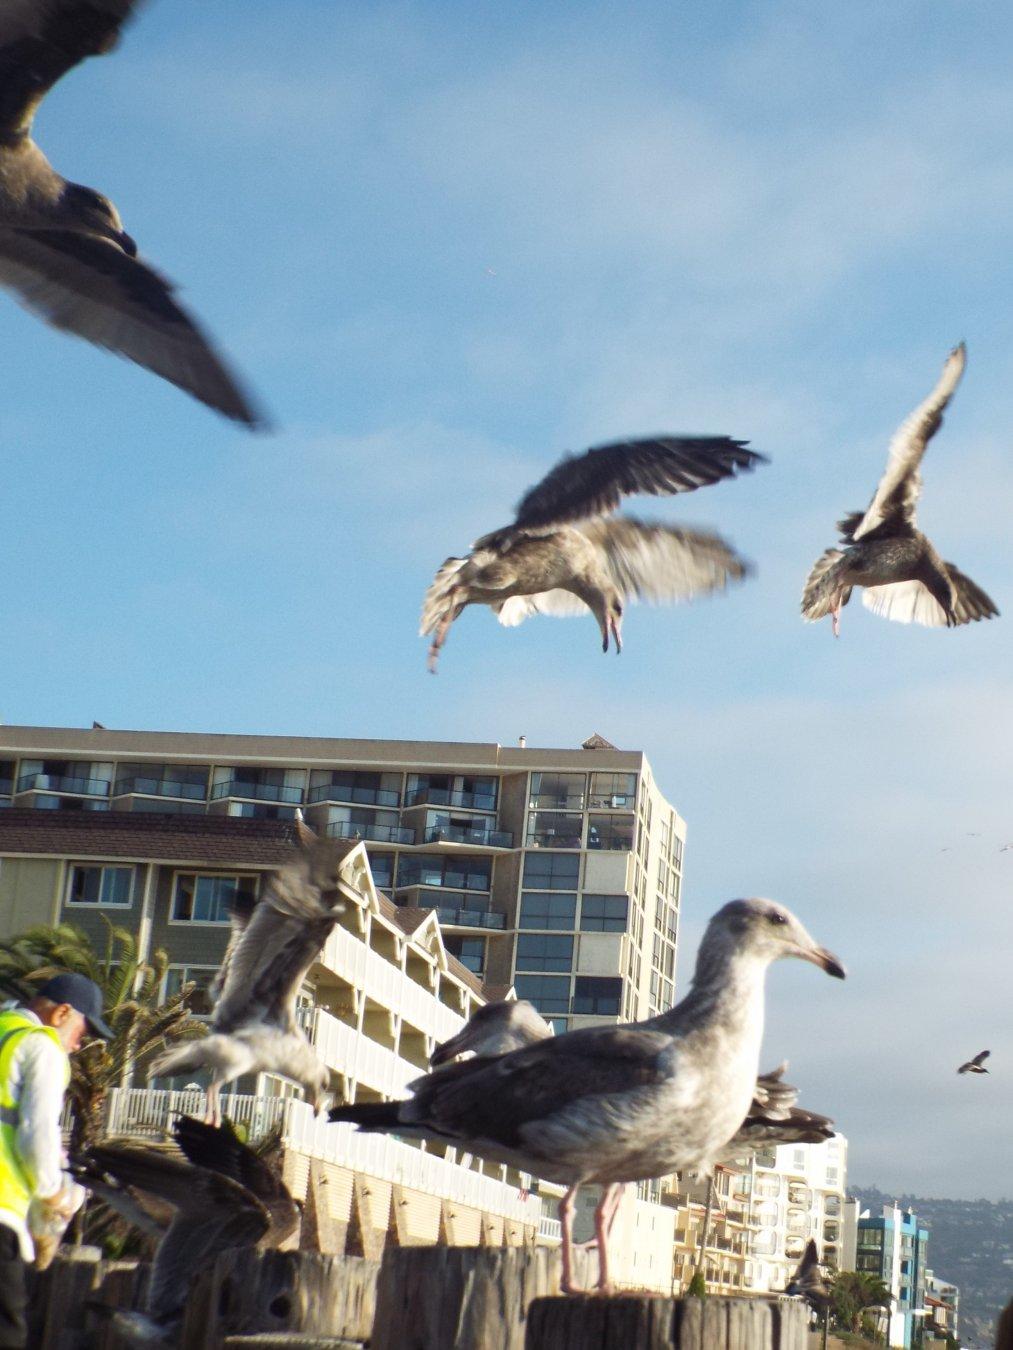 The Birds. (The guy in the vest was setting out food for the seagulls, so there were a lot of them hanging around.) #seagulls #birds